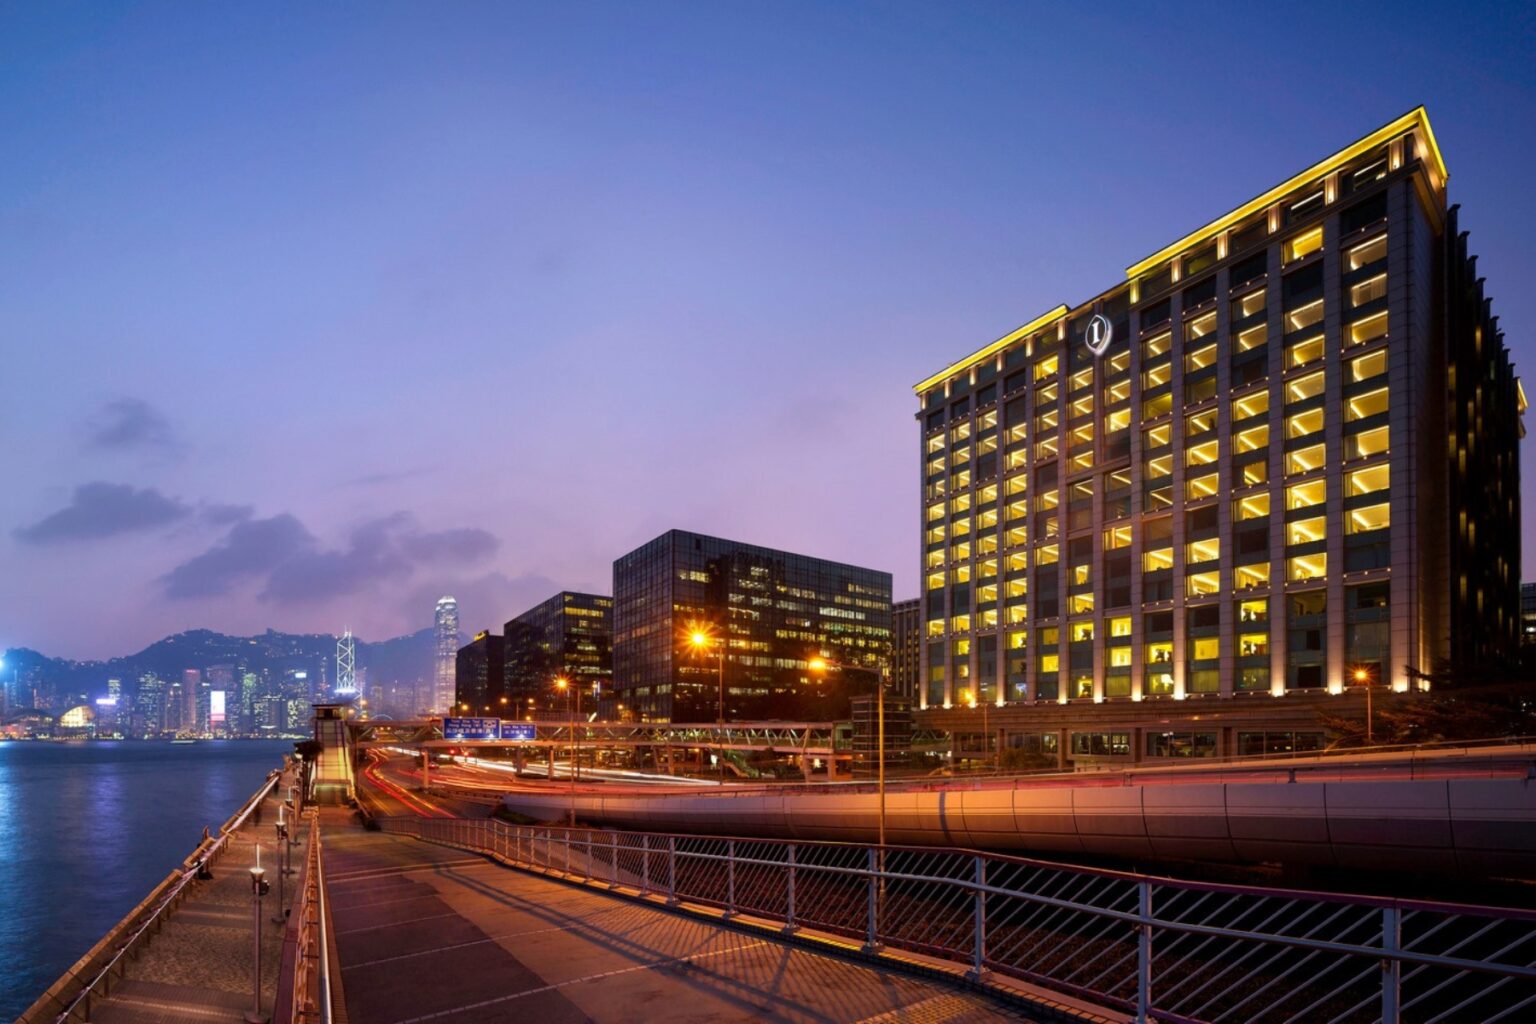 intercontinental grand stanford hong kong wins worlds leading luxury business hotel award